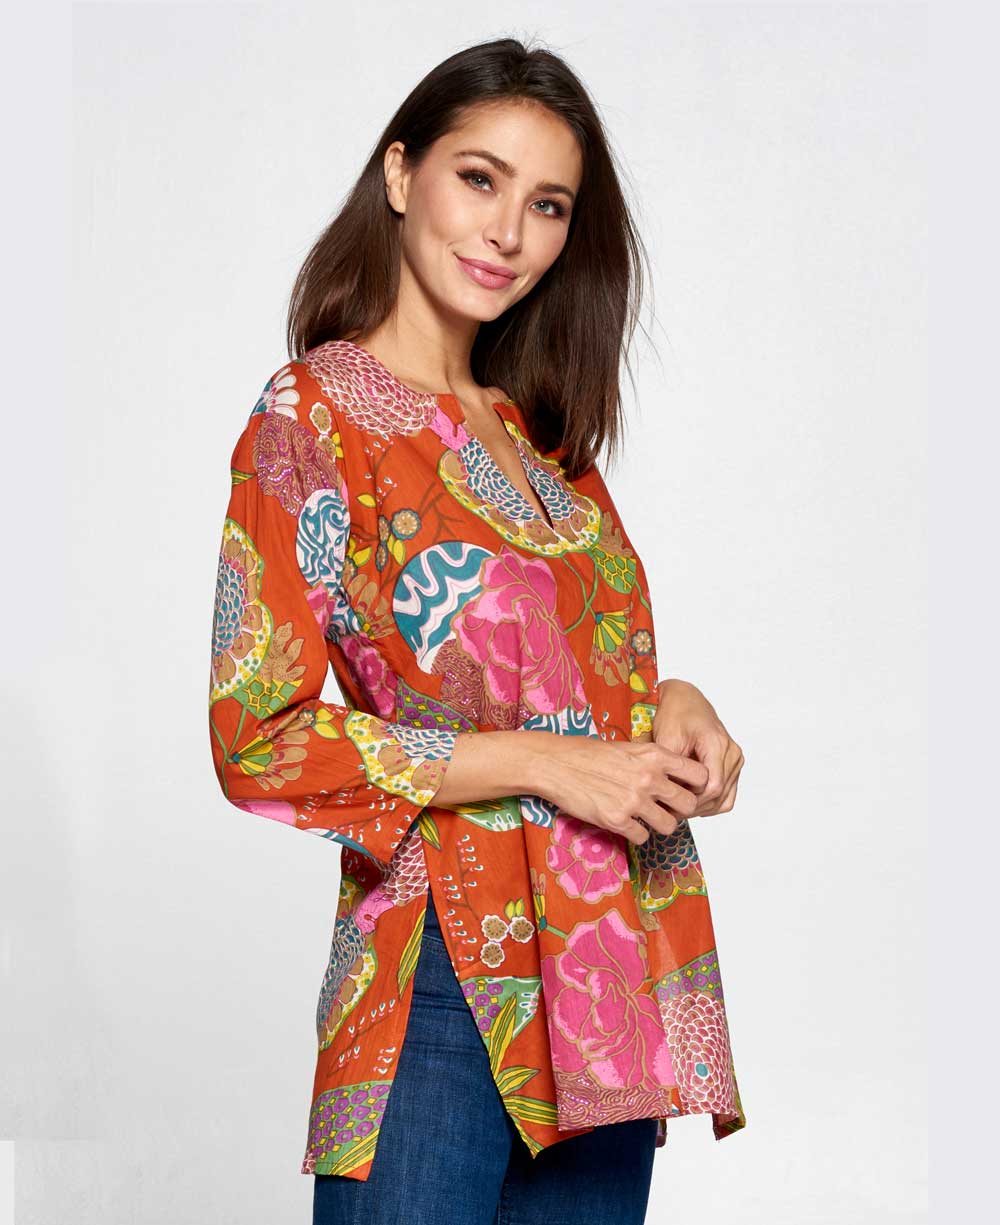 Floral Pop Tunic Top